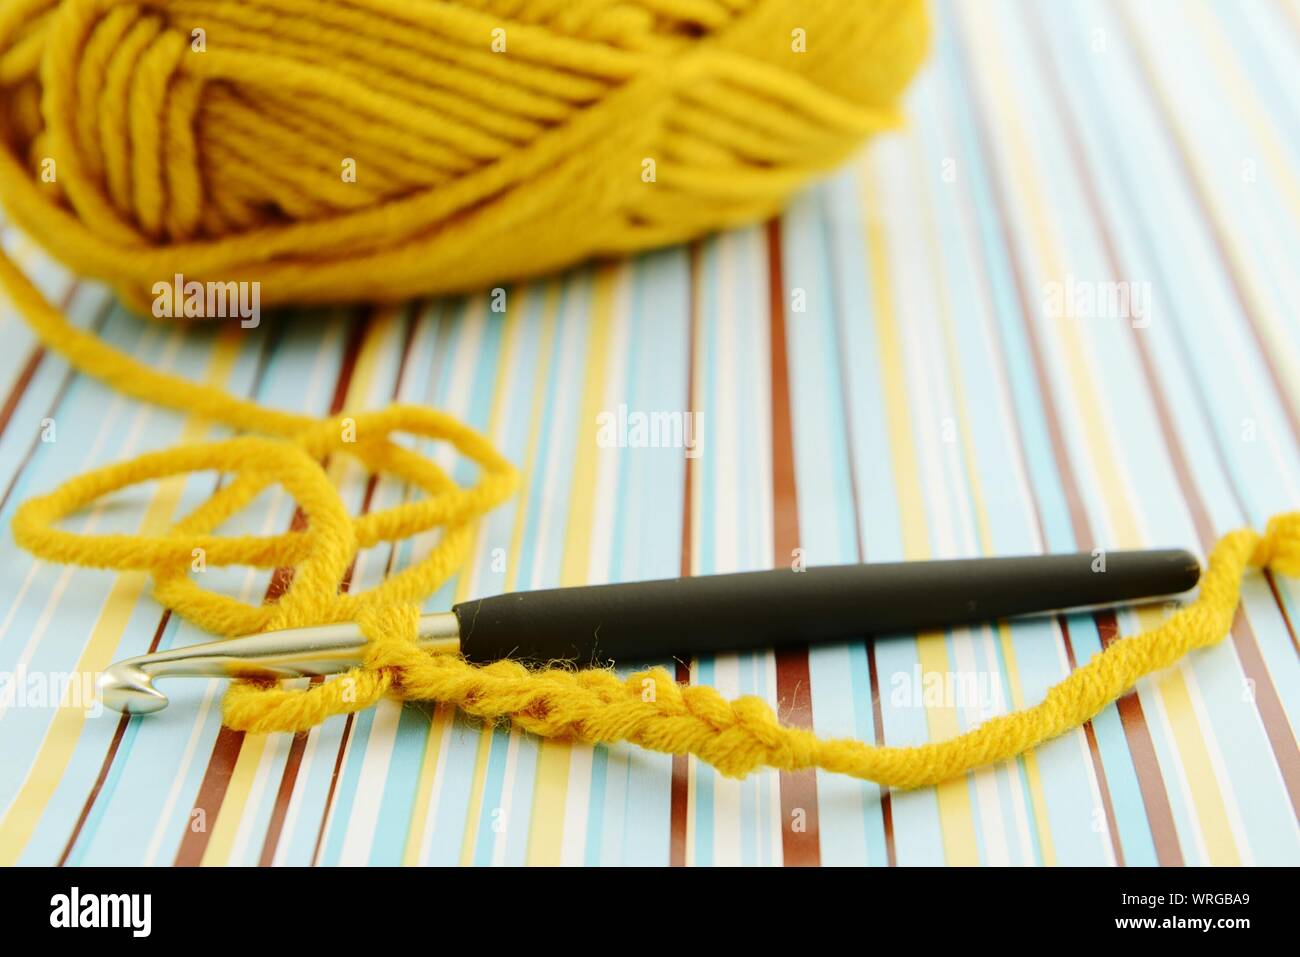 Ball Of Wool With Crochet Hook On Striped Paper Stock Photo